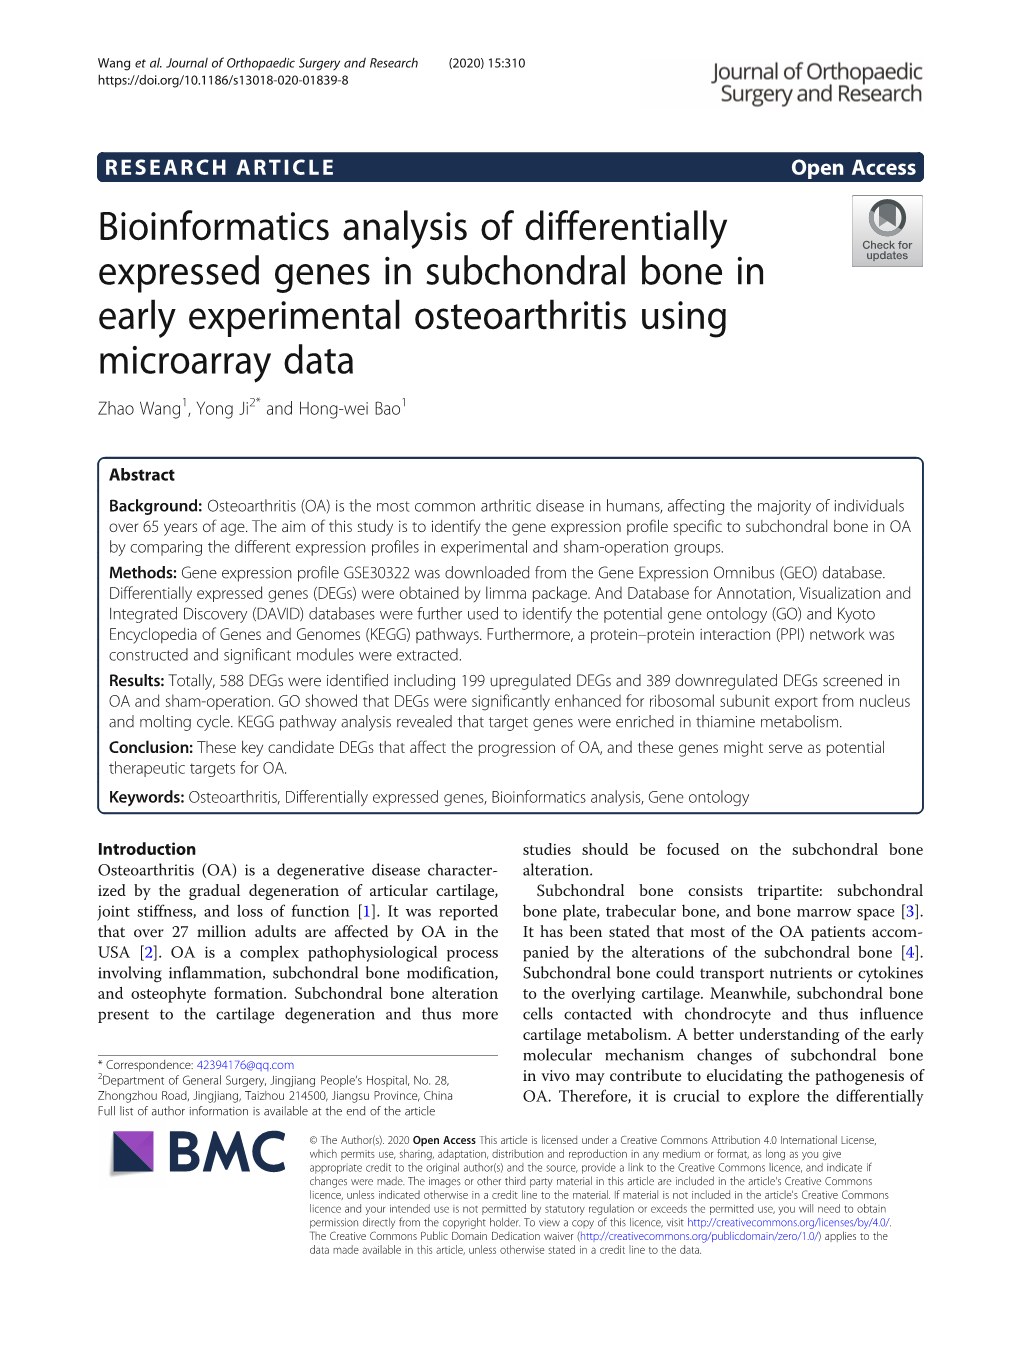 Bioinformatics Analysis of Differentially Expressed Genes in Subchondral